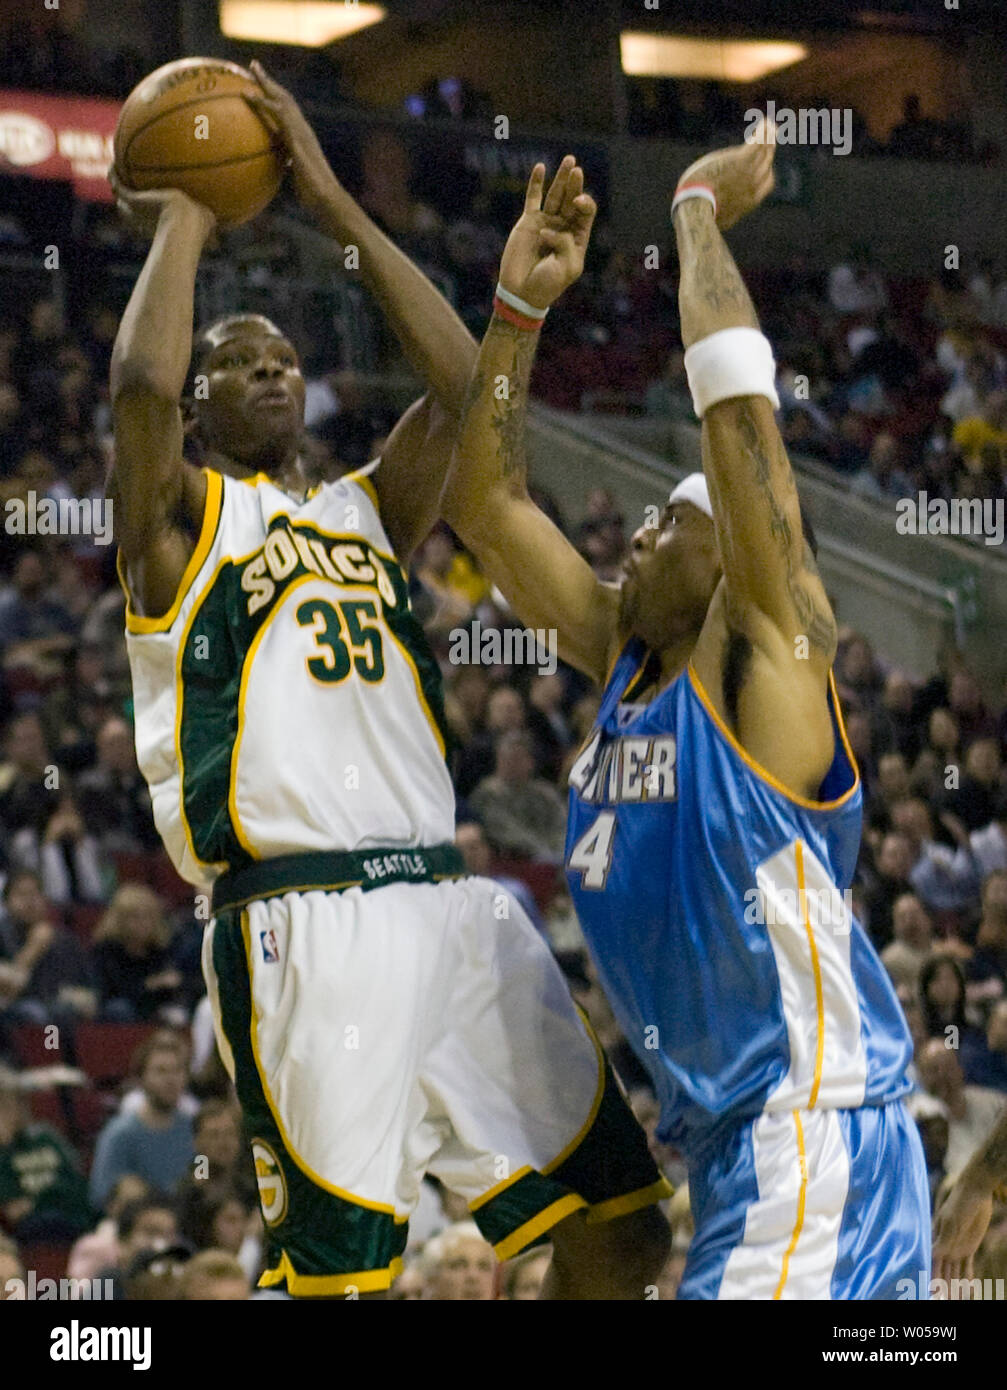 The Seattle SuperSonics Kevin Durant (35) drives around Minnesota  Timberwolves defender Ryan Gomes (8) during second half action. The Sonics  defeated the Timberwolves, 111-108, at the Target Center in Minneapolis,  Minnesota, Sunday